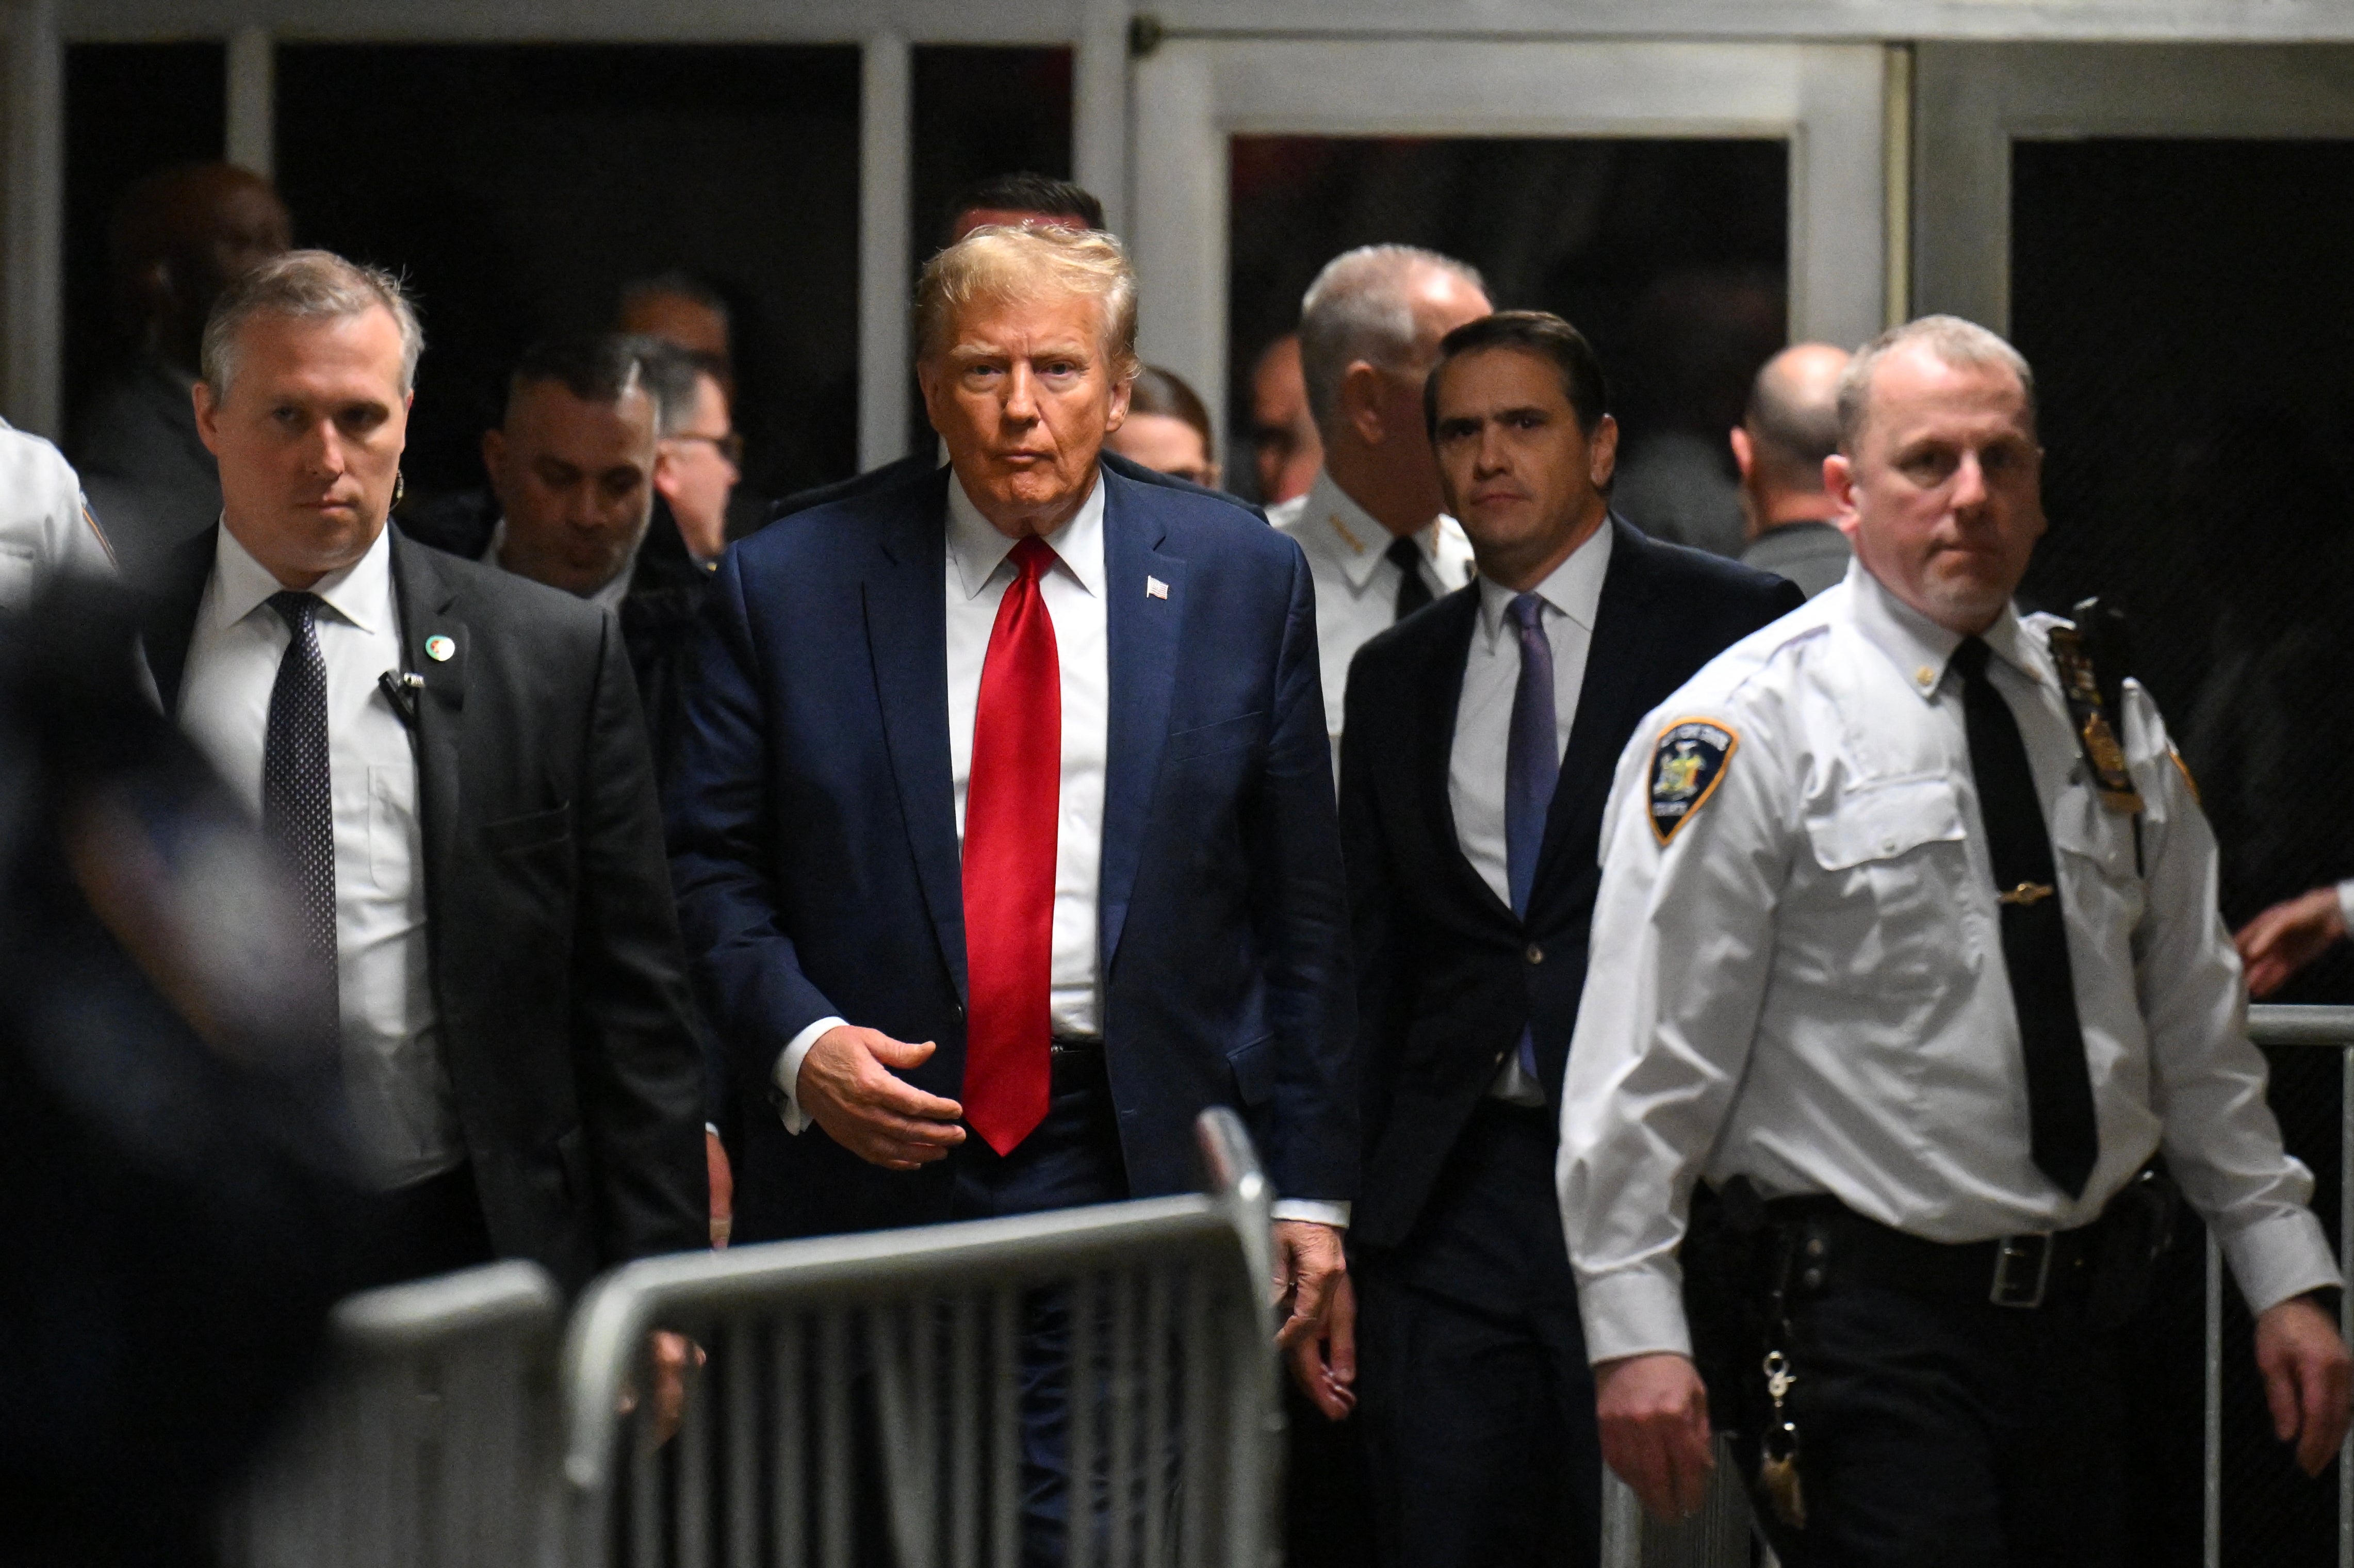 Donald Trump appears inside Manhattan criminal court for a pretrial hearing in his hush money case on 15 February